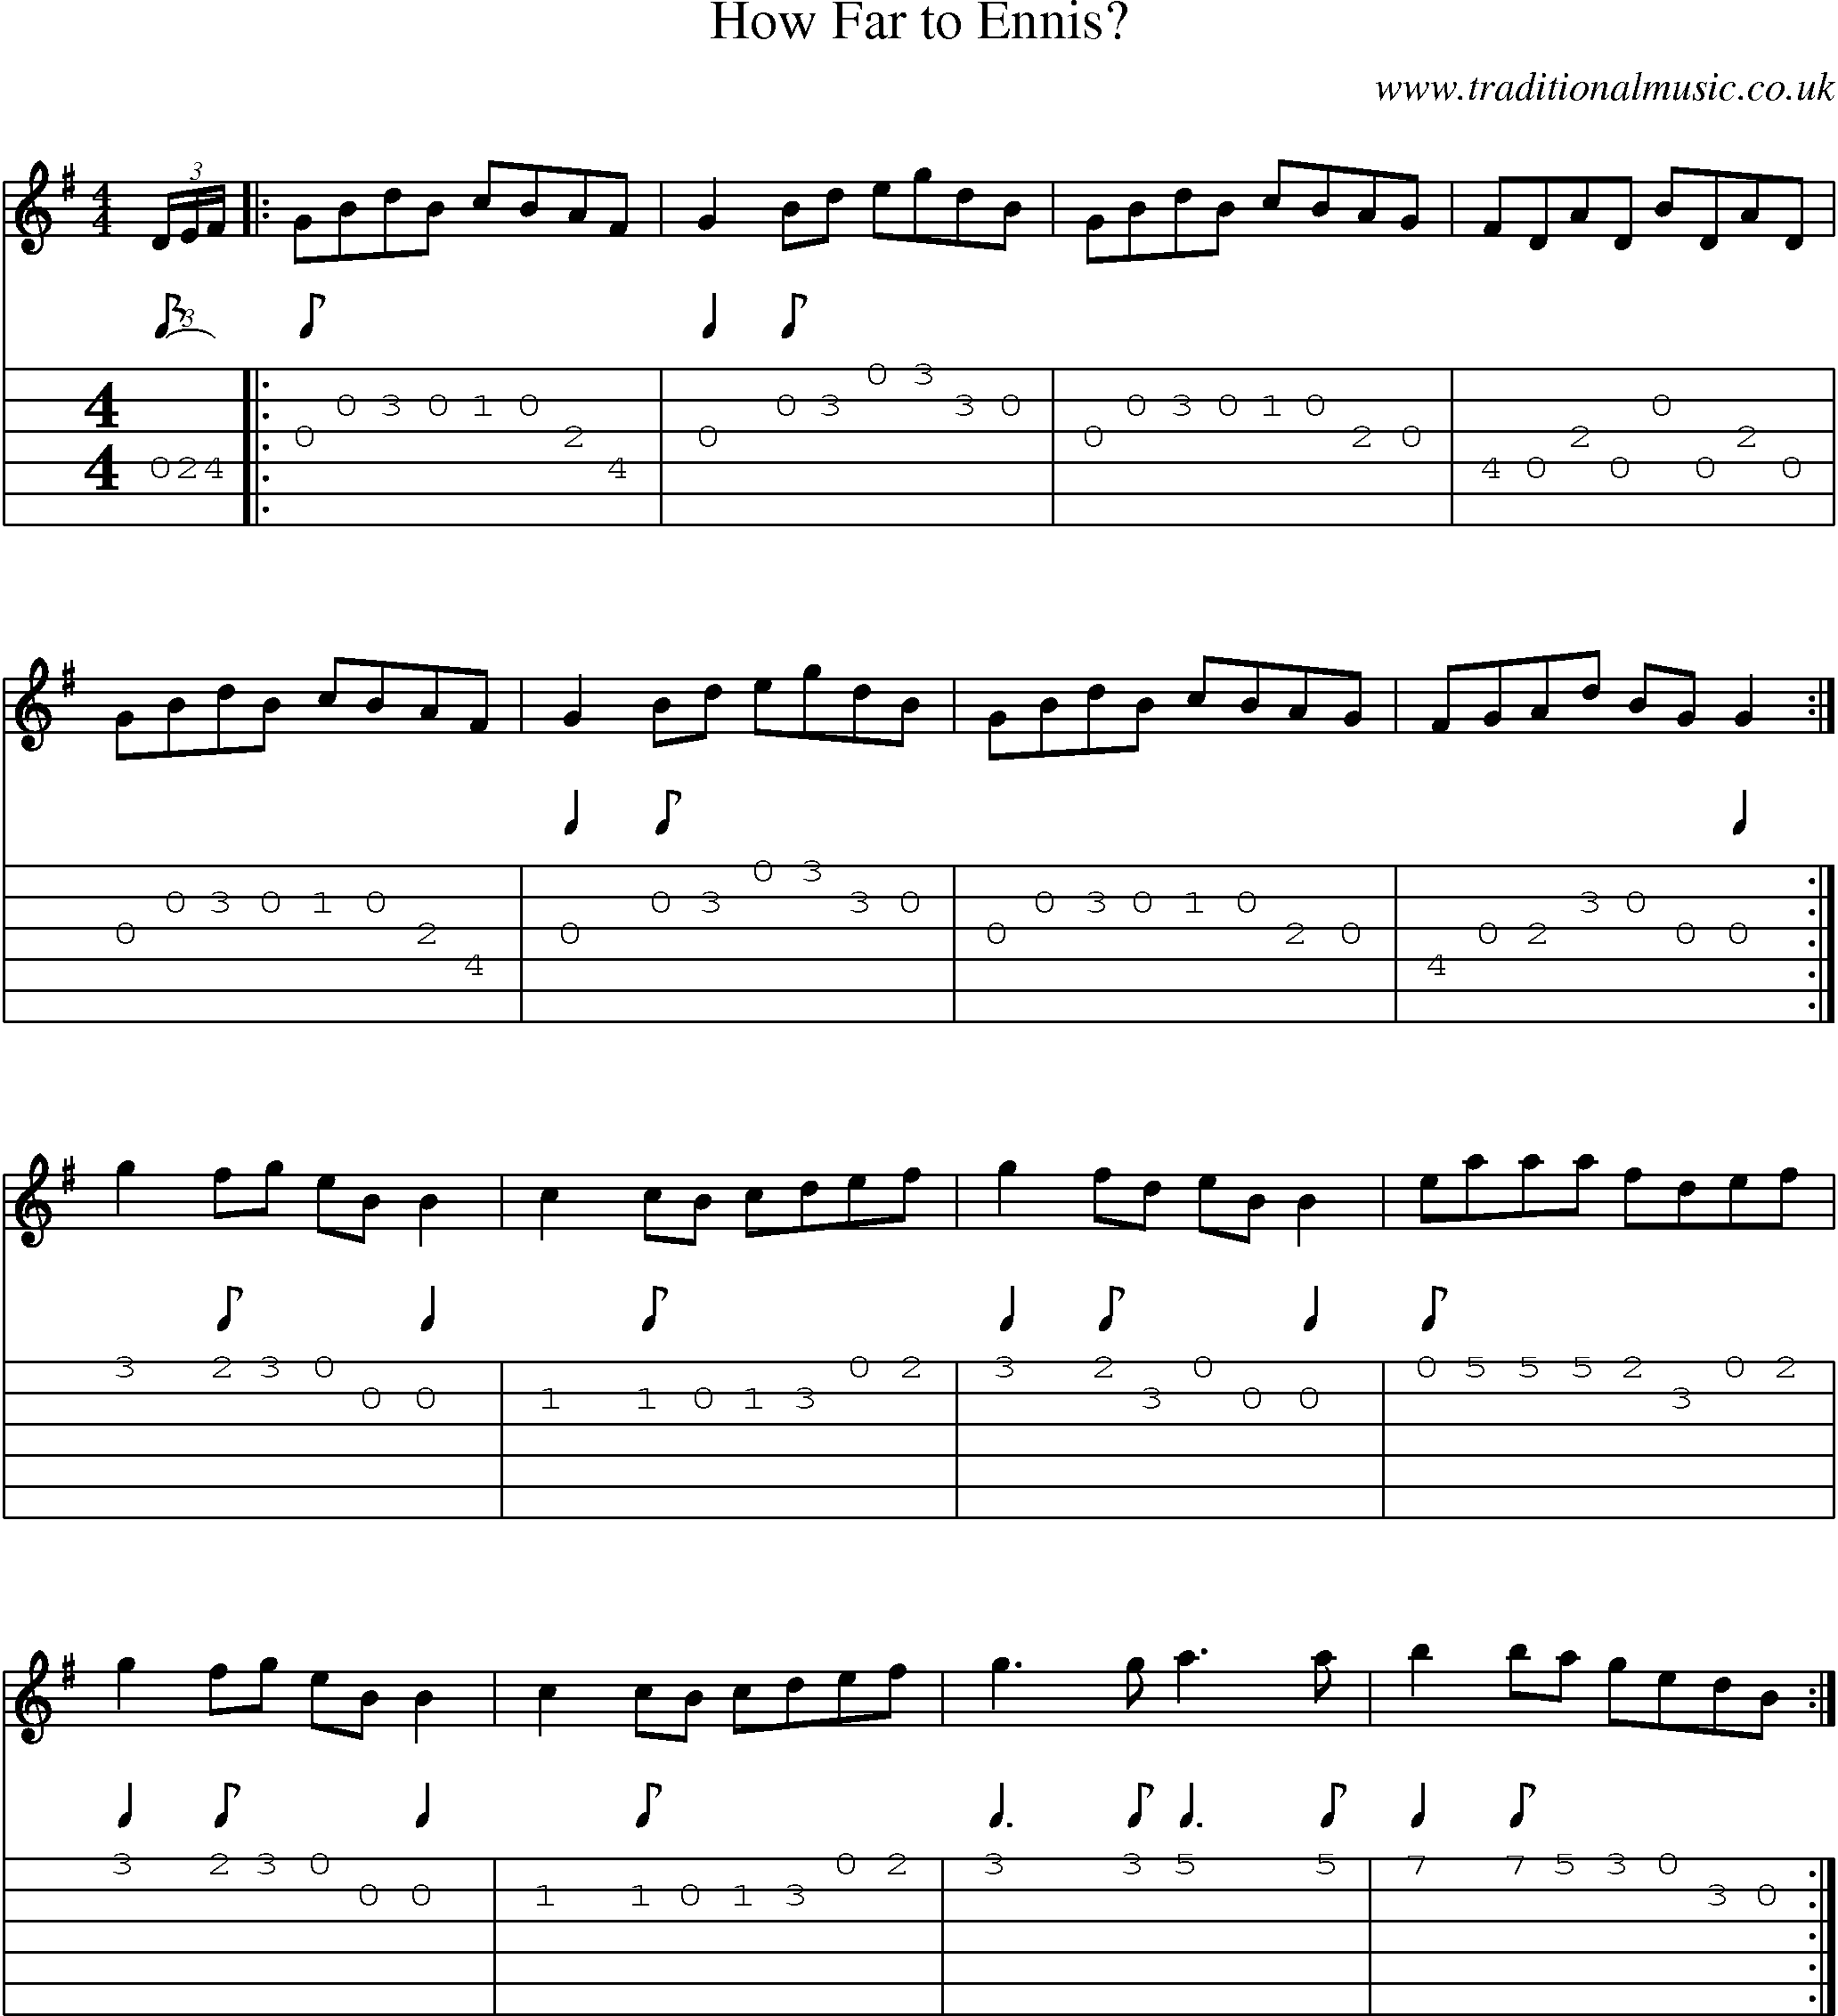 Music Score and Guitar Tabs for How Far To Ennis